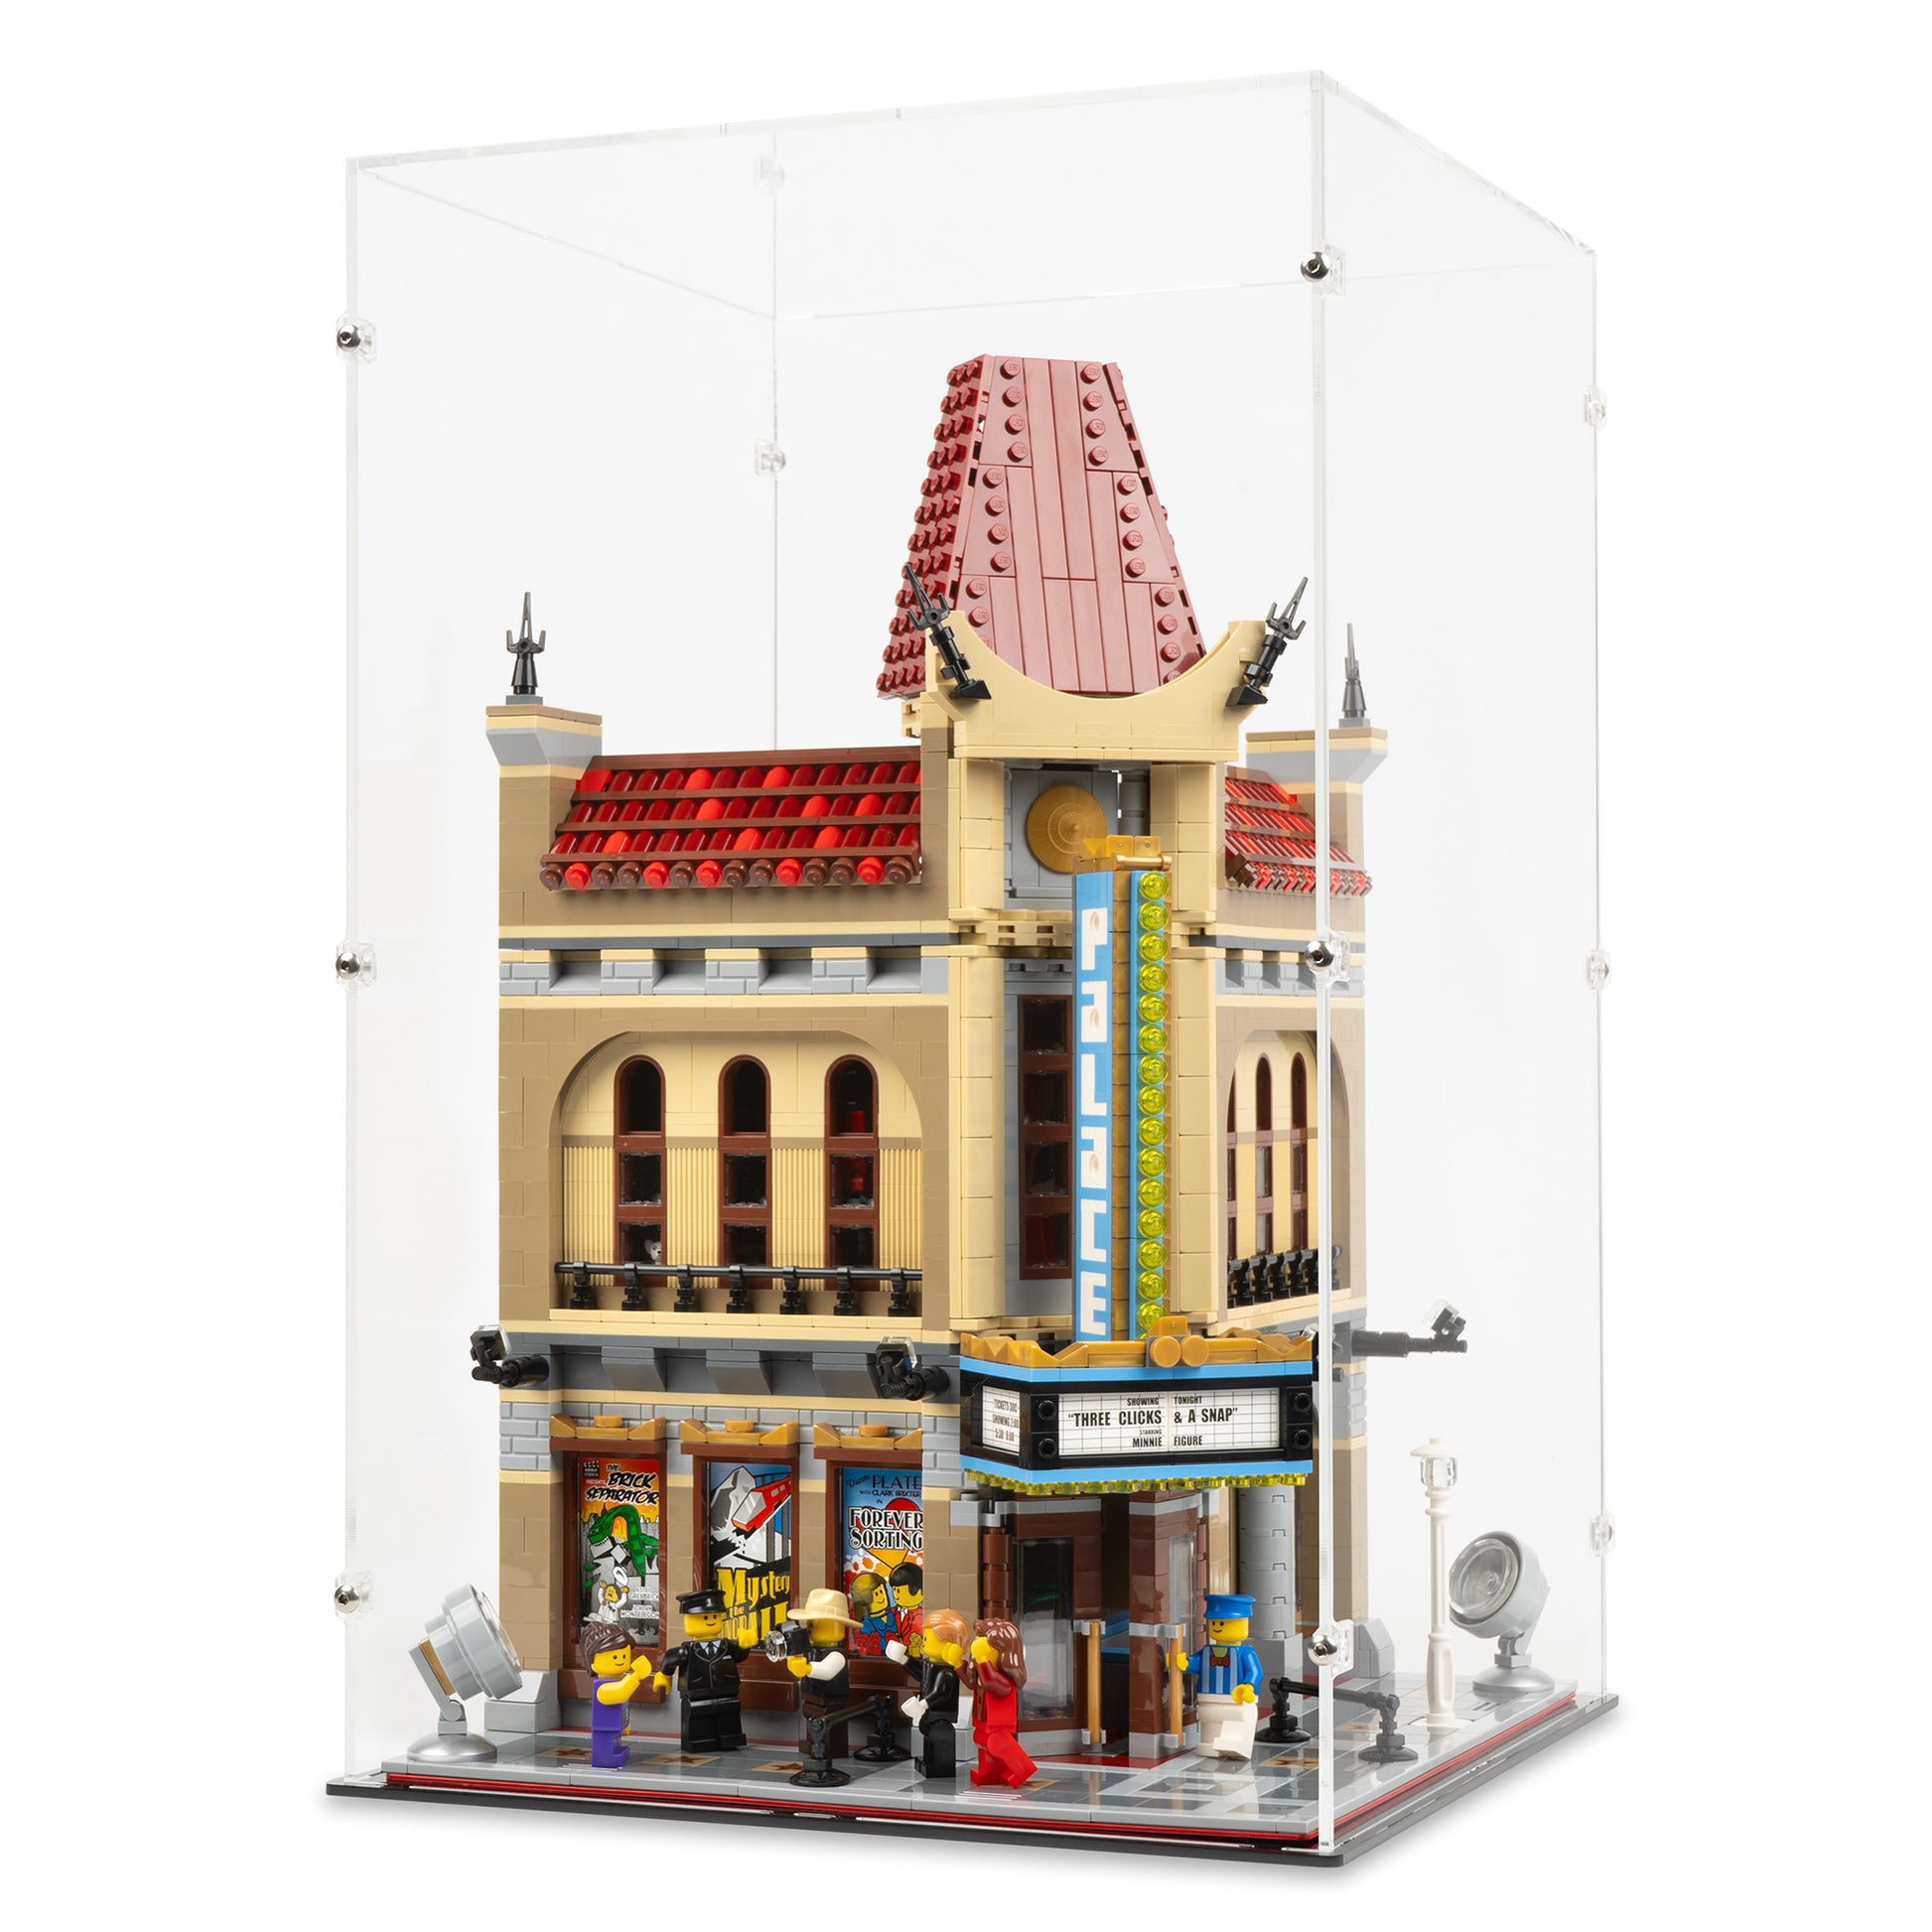 Angled view of LEGO 10232 Palace Cinema Display Case.